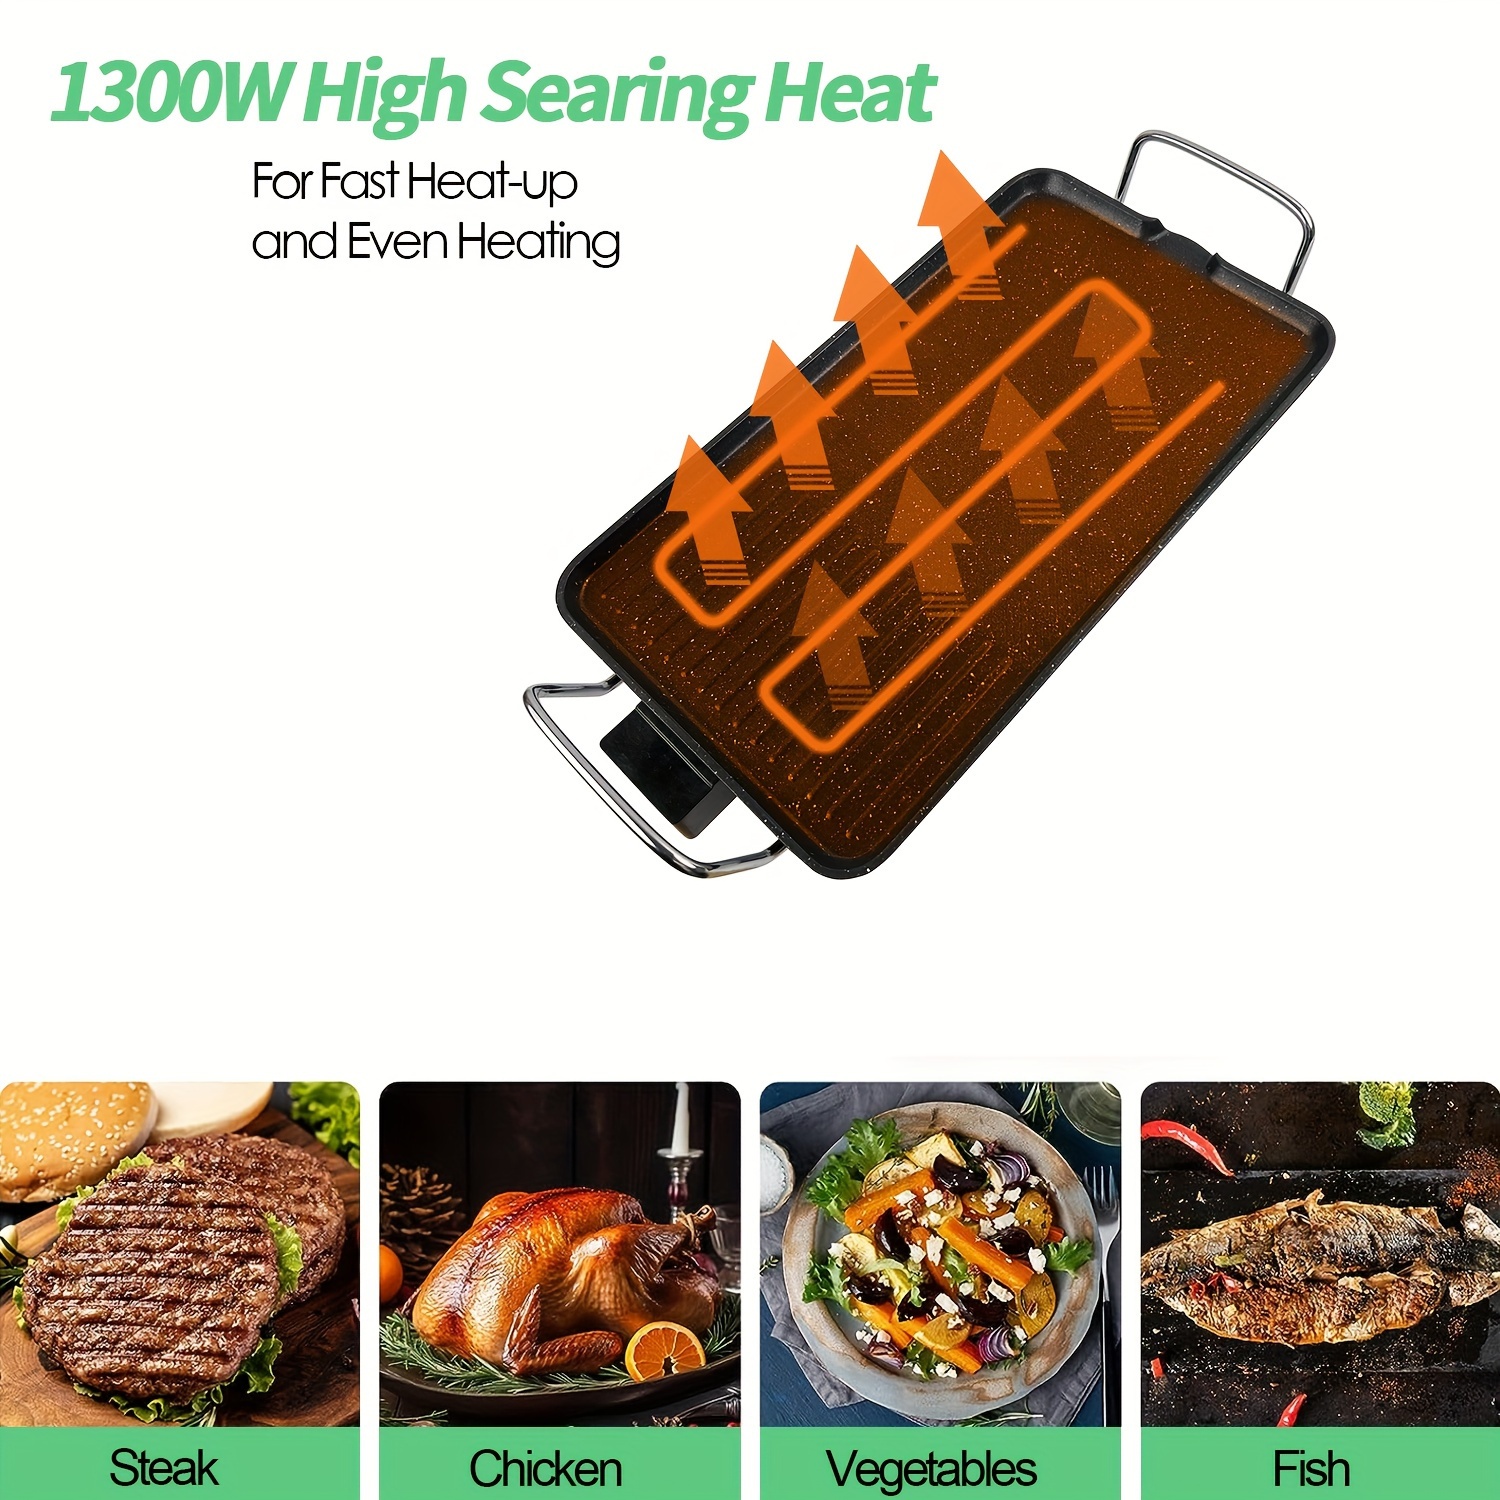 Royalstar Electric Baking Tray, Electric Baking Oven, Household  Multifunctional Baking Tray, Smokeless And Non Stick Pot, Barbecue Meat  Pot, Barbecue